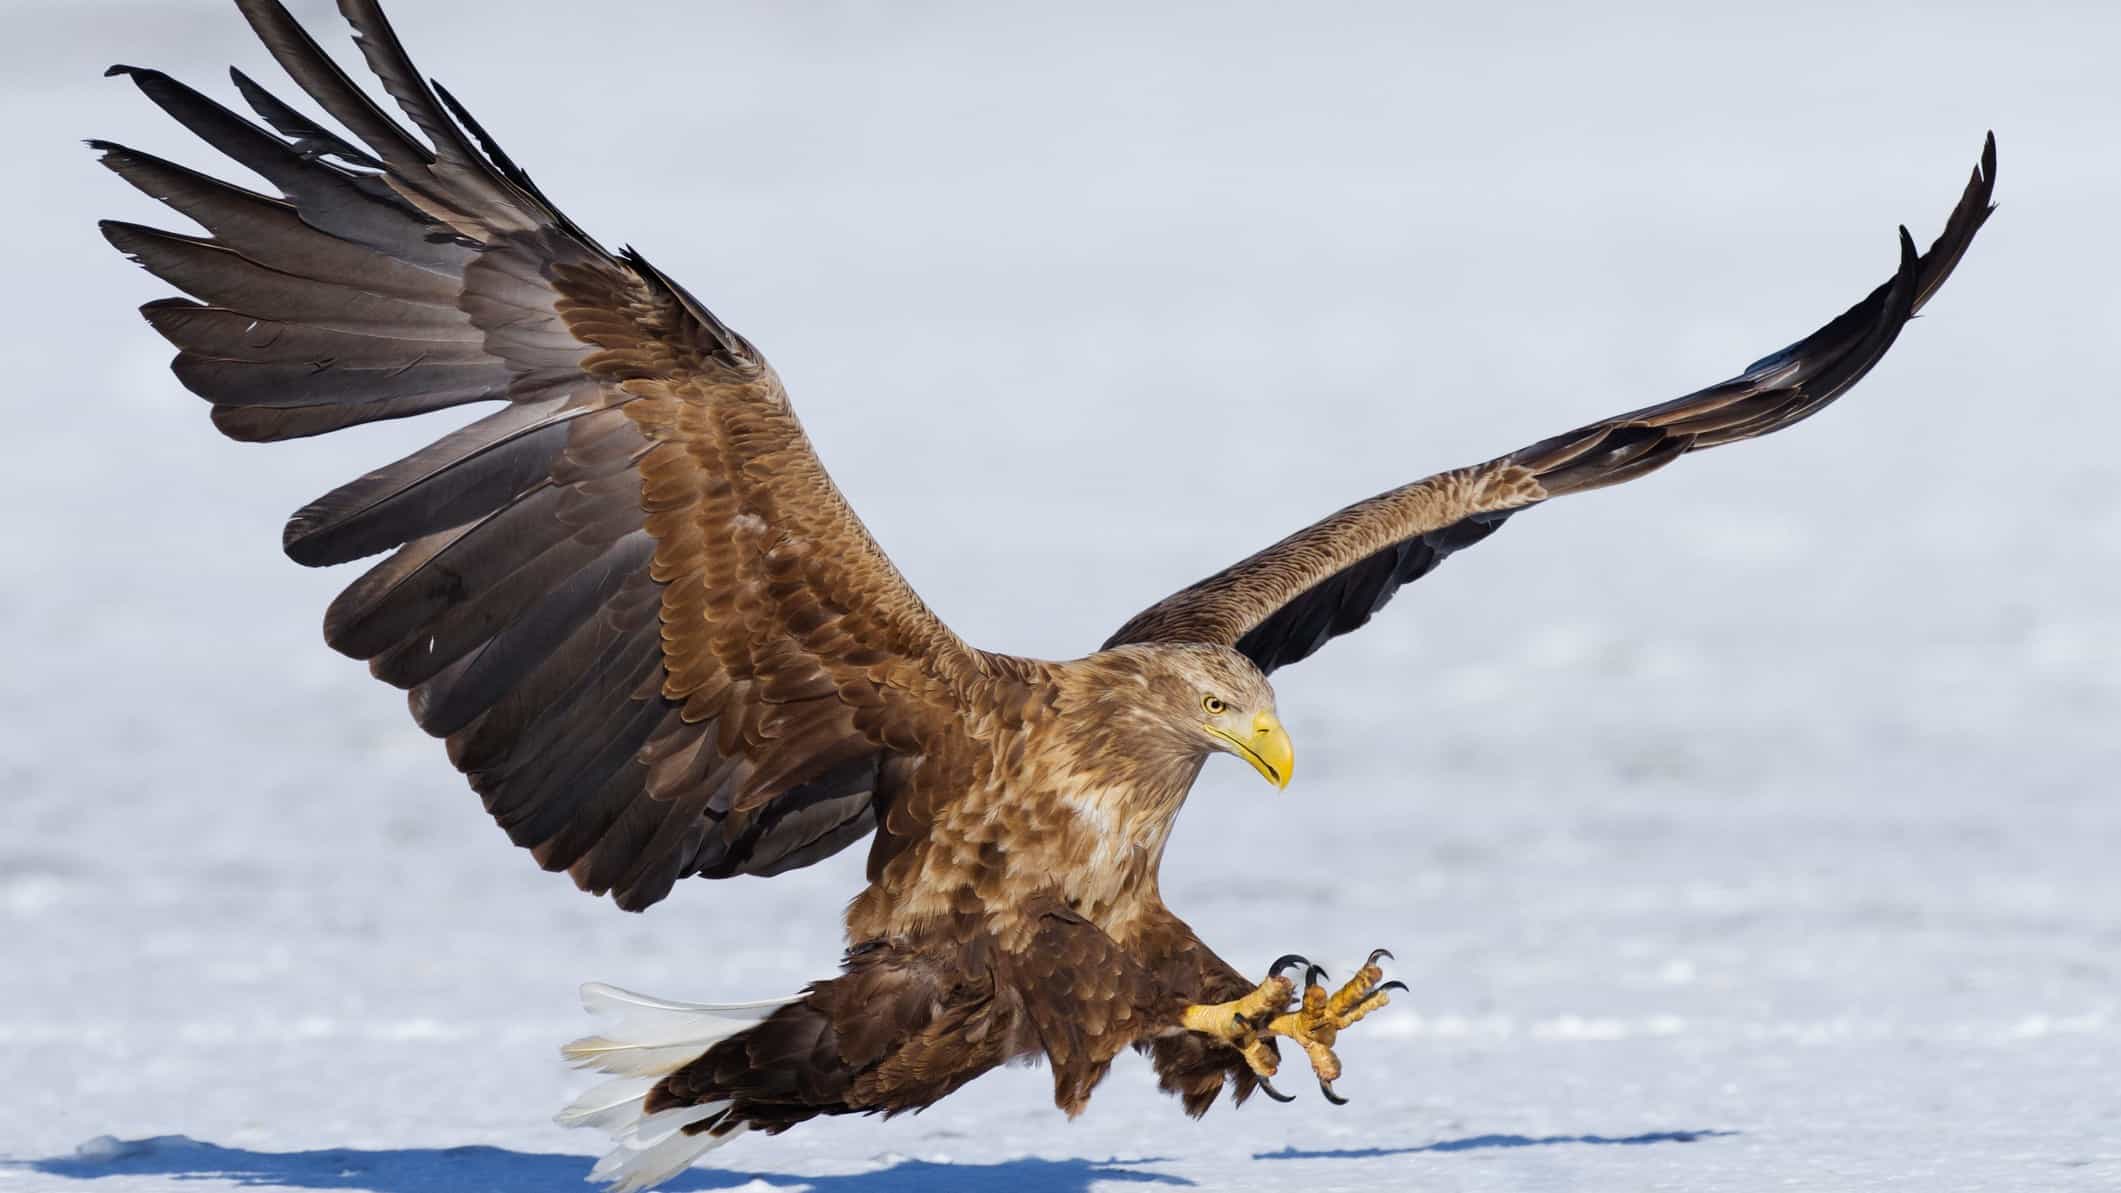 A white-tailed eagle landing in the snow.